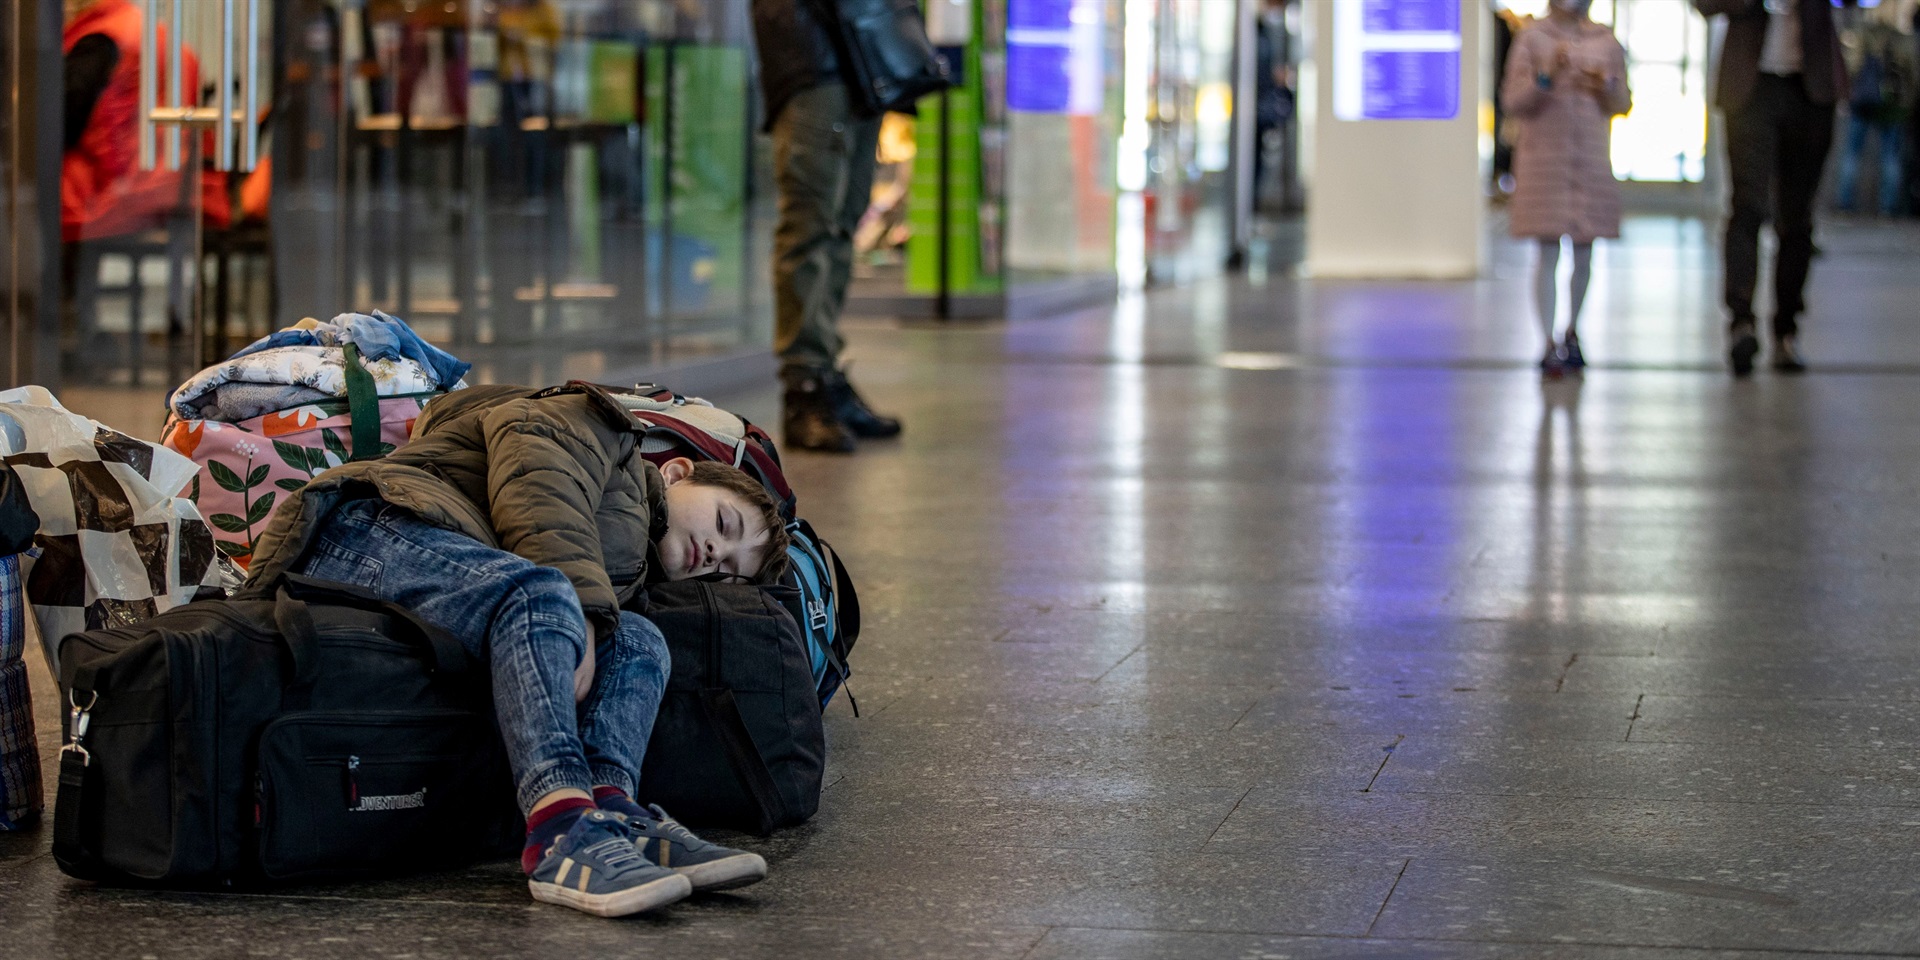 A little boy lies asleep on some travel bags, his mother is looking for ways to continue her journey. Photo by Christoph Reichwein/picture alliance via Getty